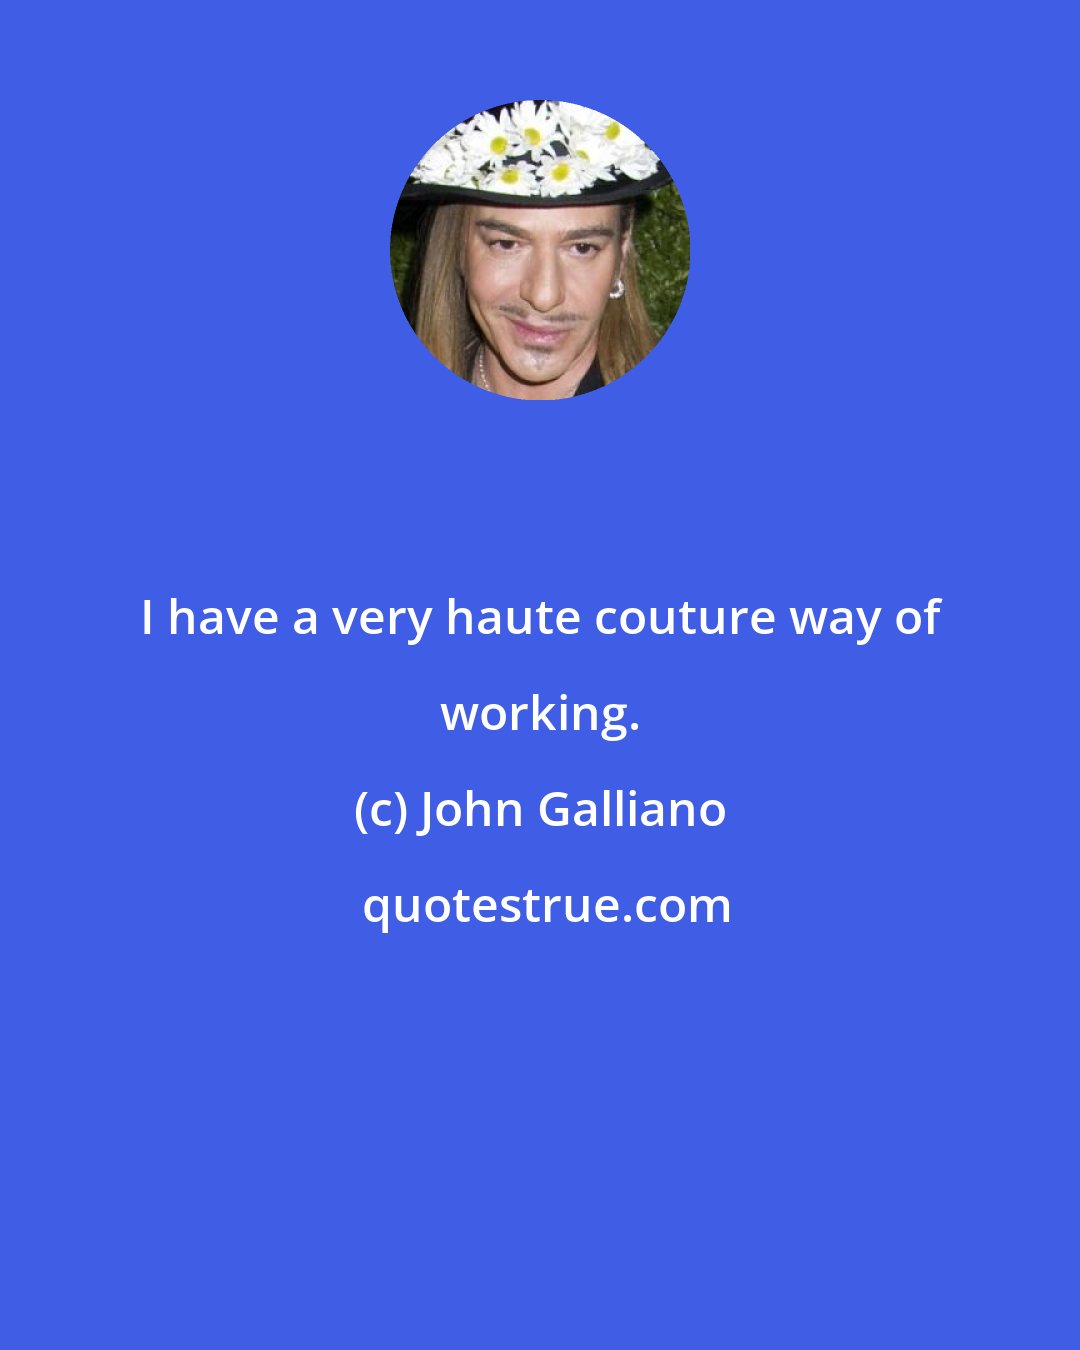 John Galliano: I have a very haute couture way of working.